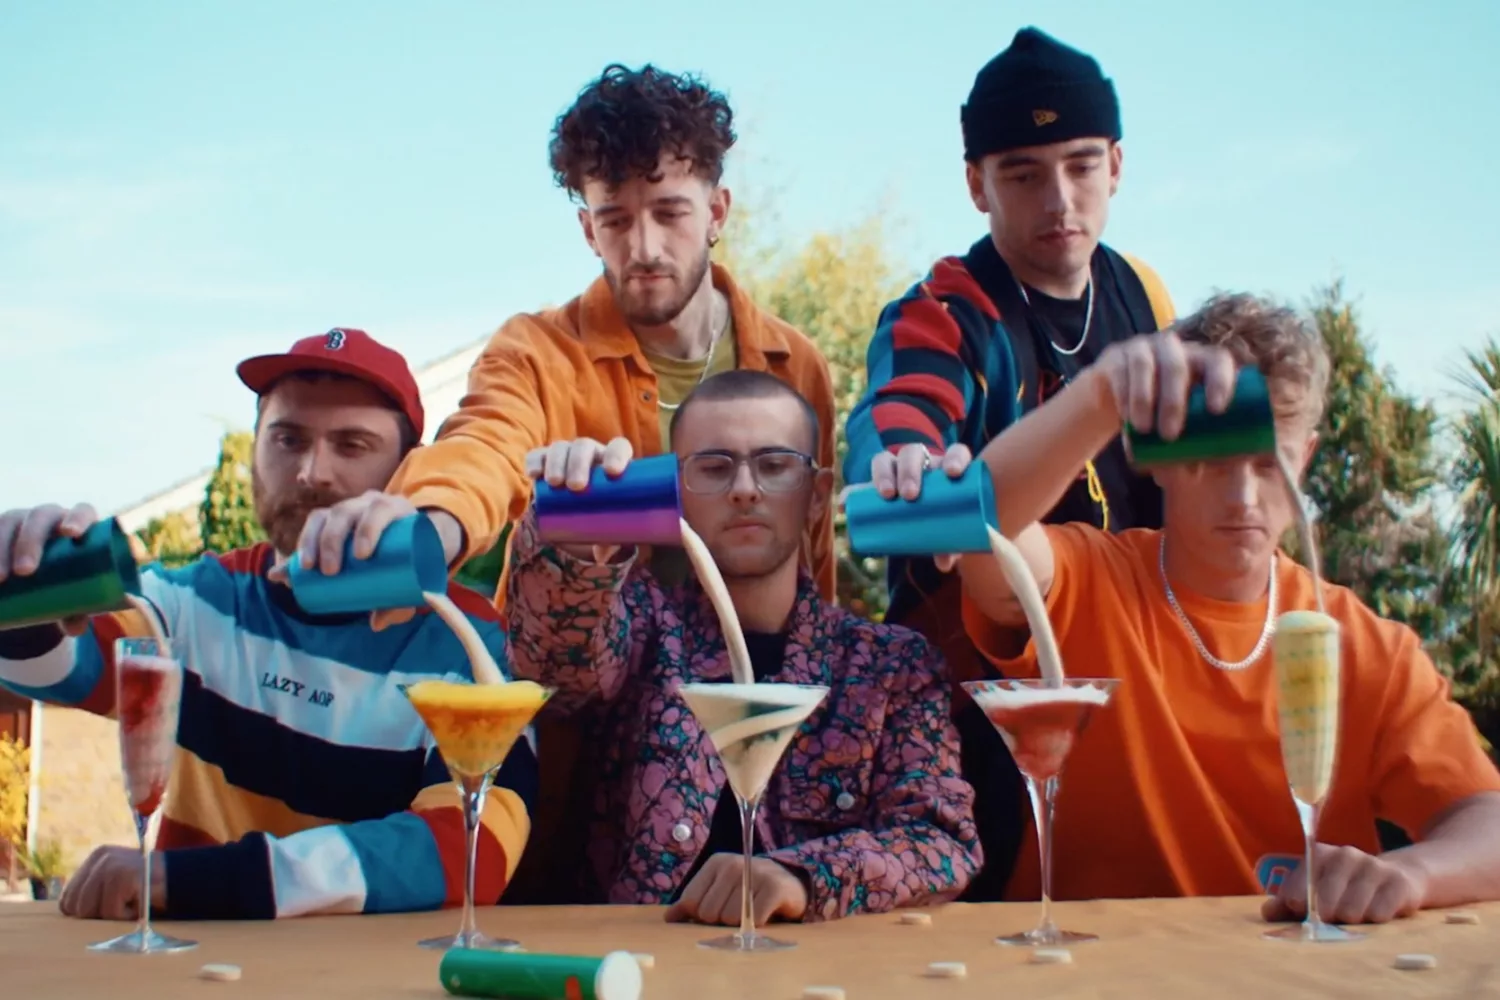 Easy Life reveal 'Daydreams' video